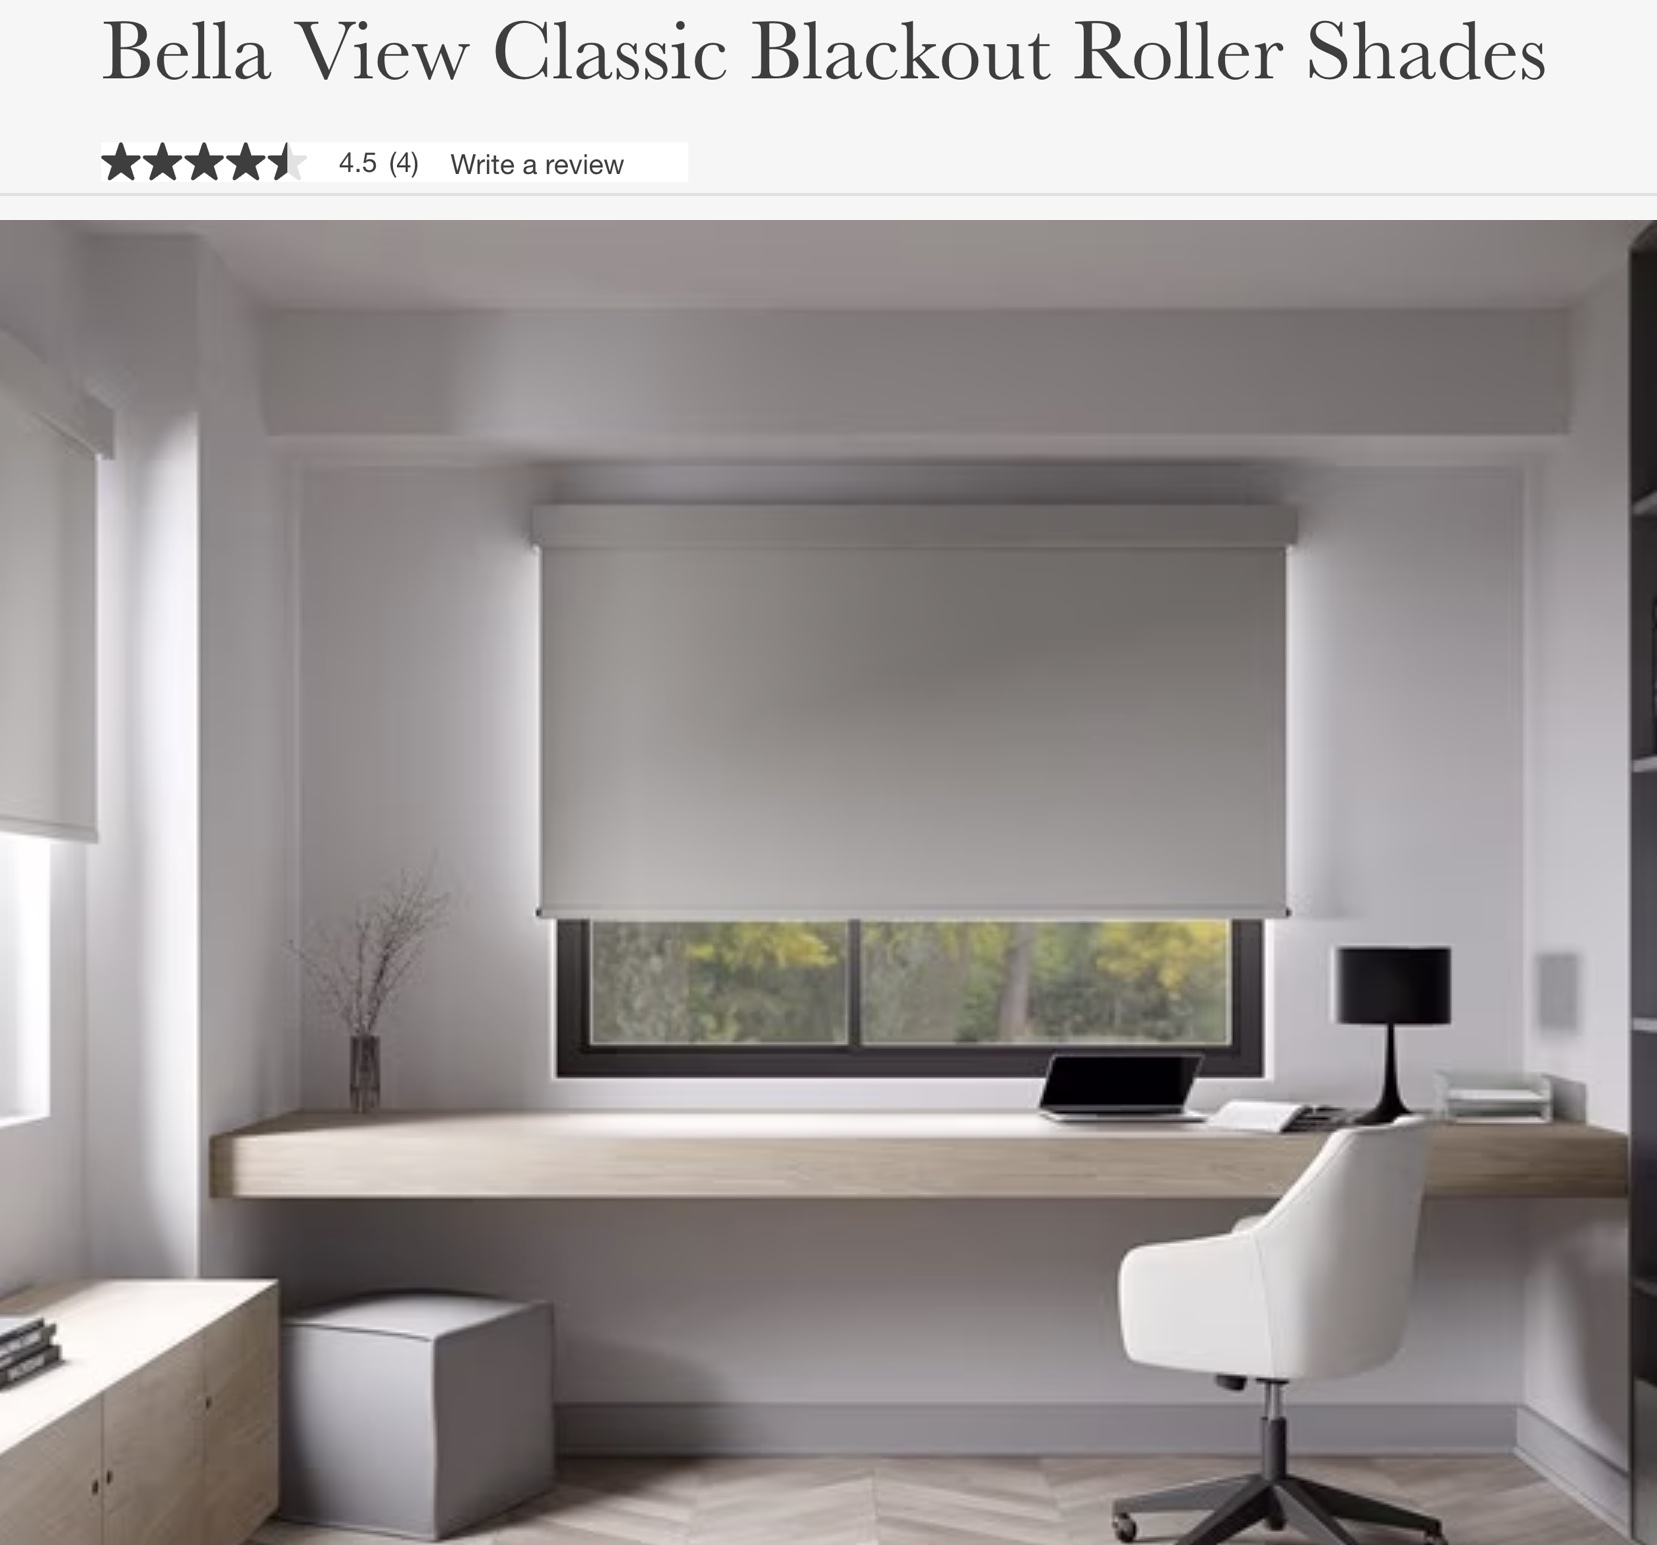 great for home office decor blackout roller shades american blinds 